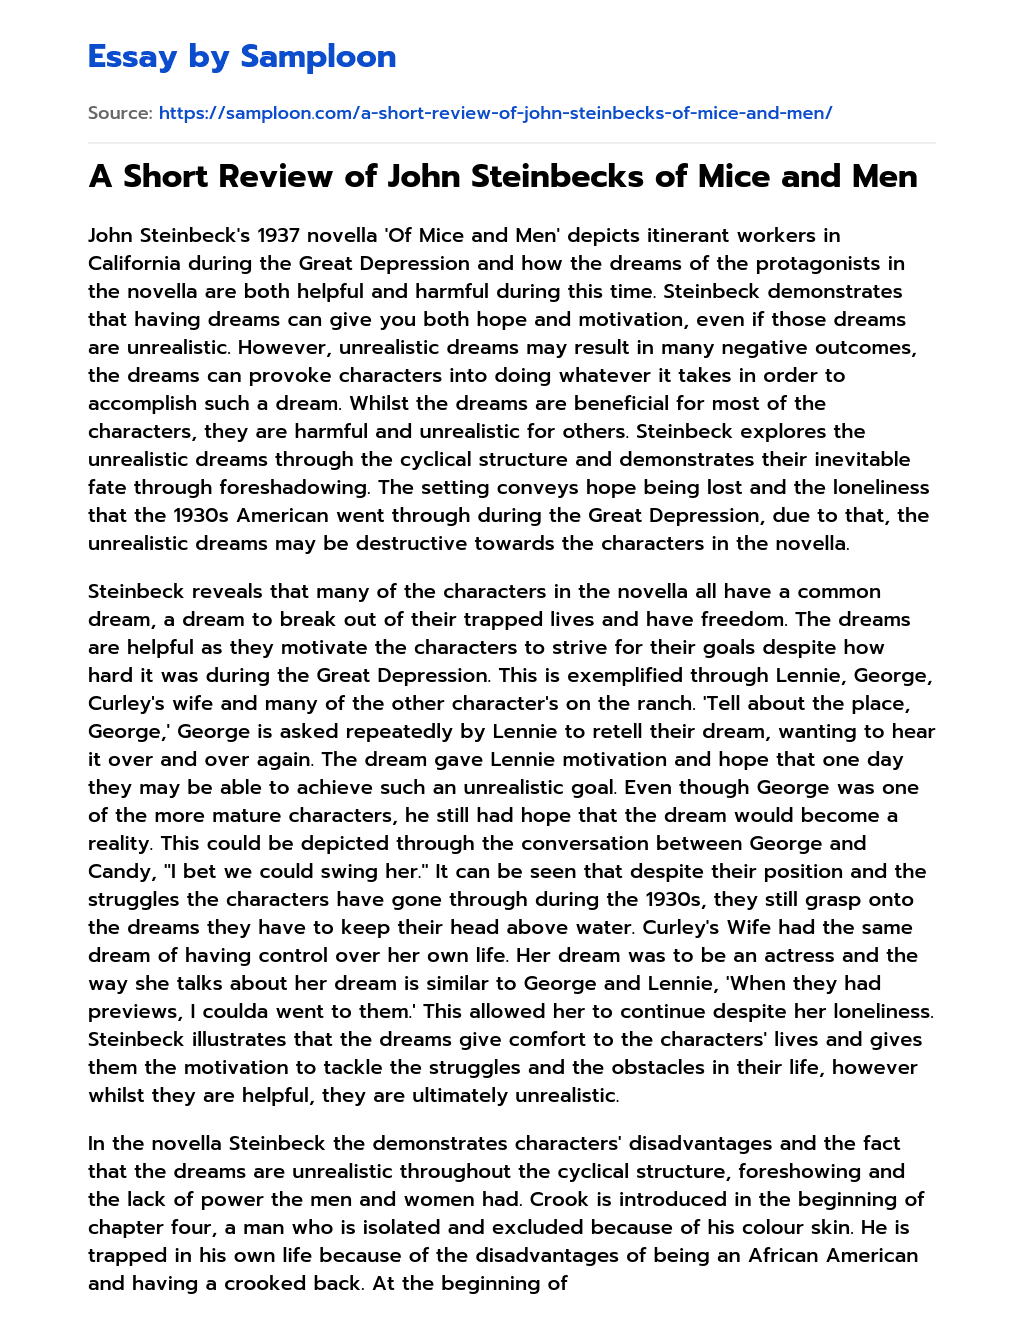 A Short Review of John Steinbecks of Mice and Men essay